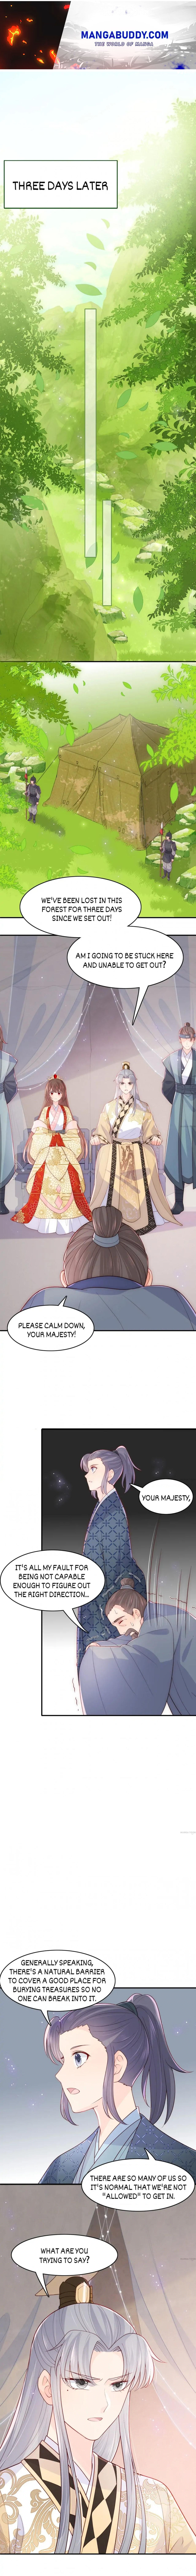 Raising The Enemy Only Brings Trouble - Page 1